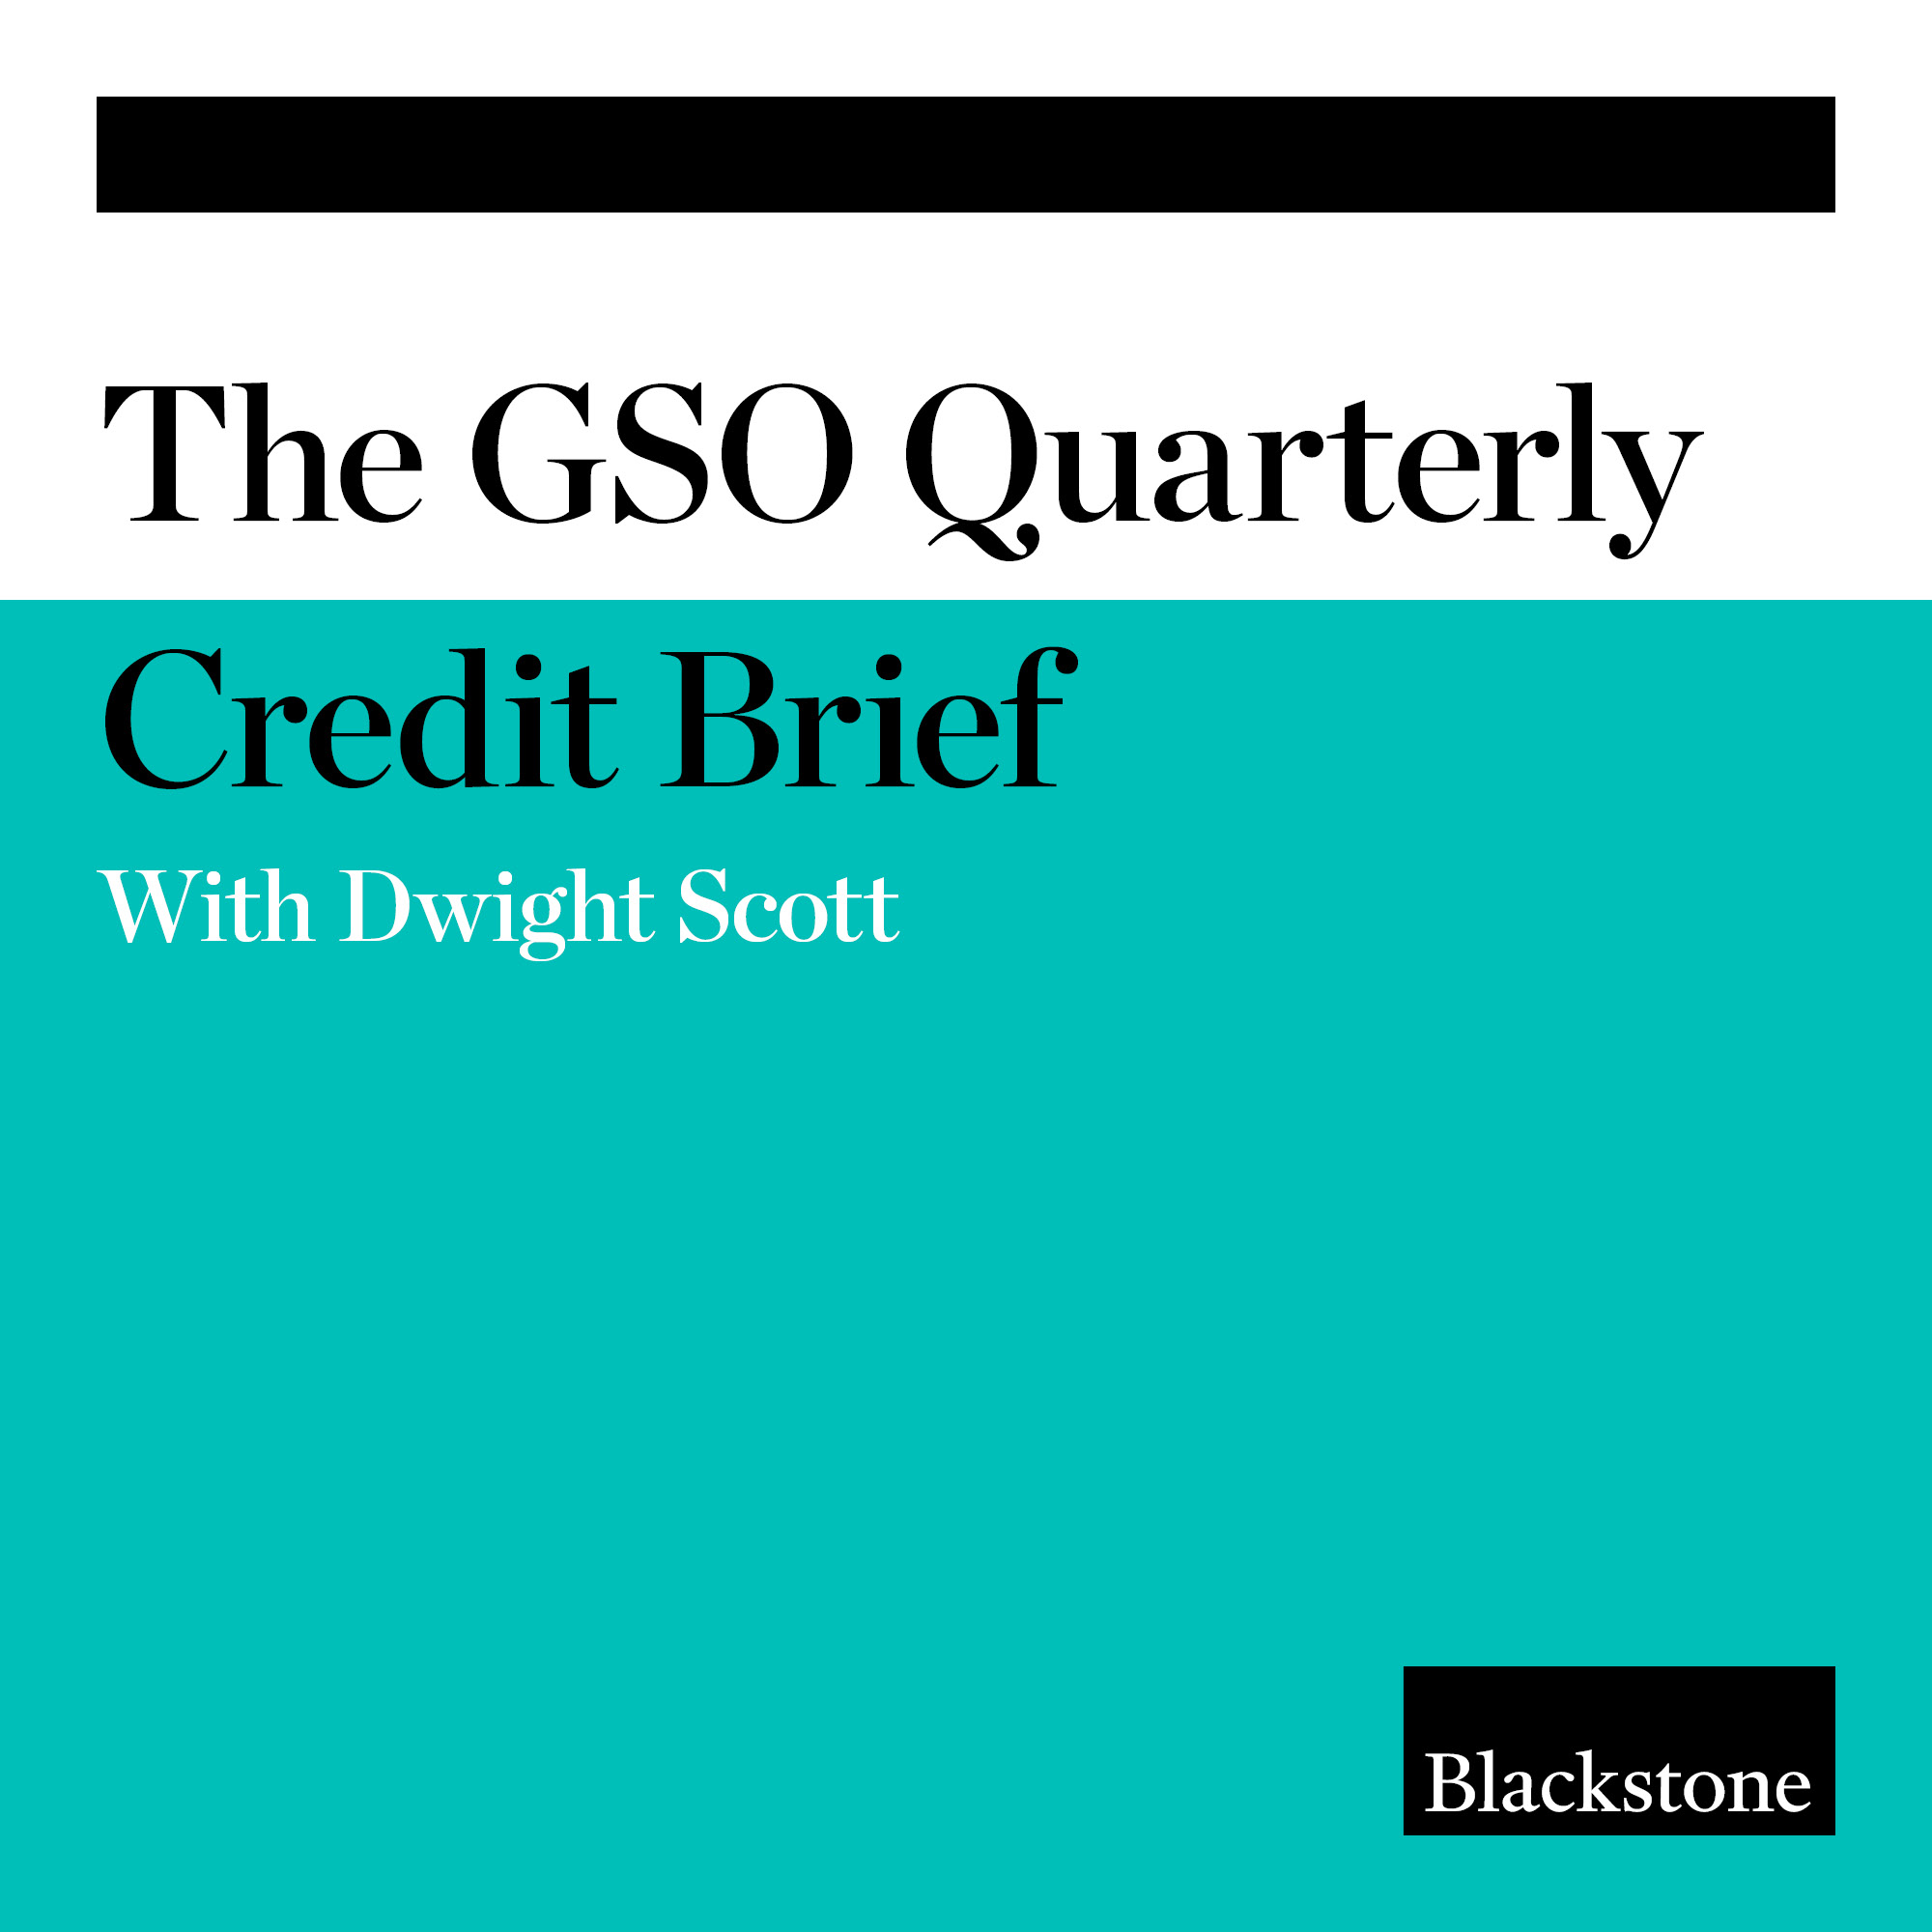 Introducing GSO President Dwight Scott’s Quarterly Podcast